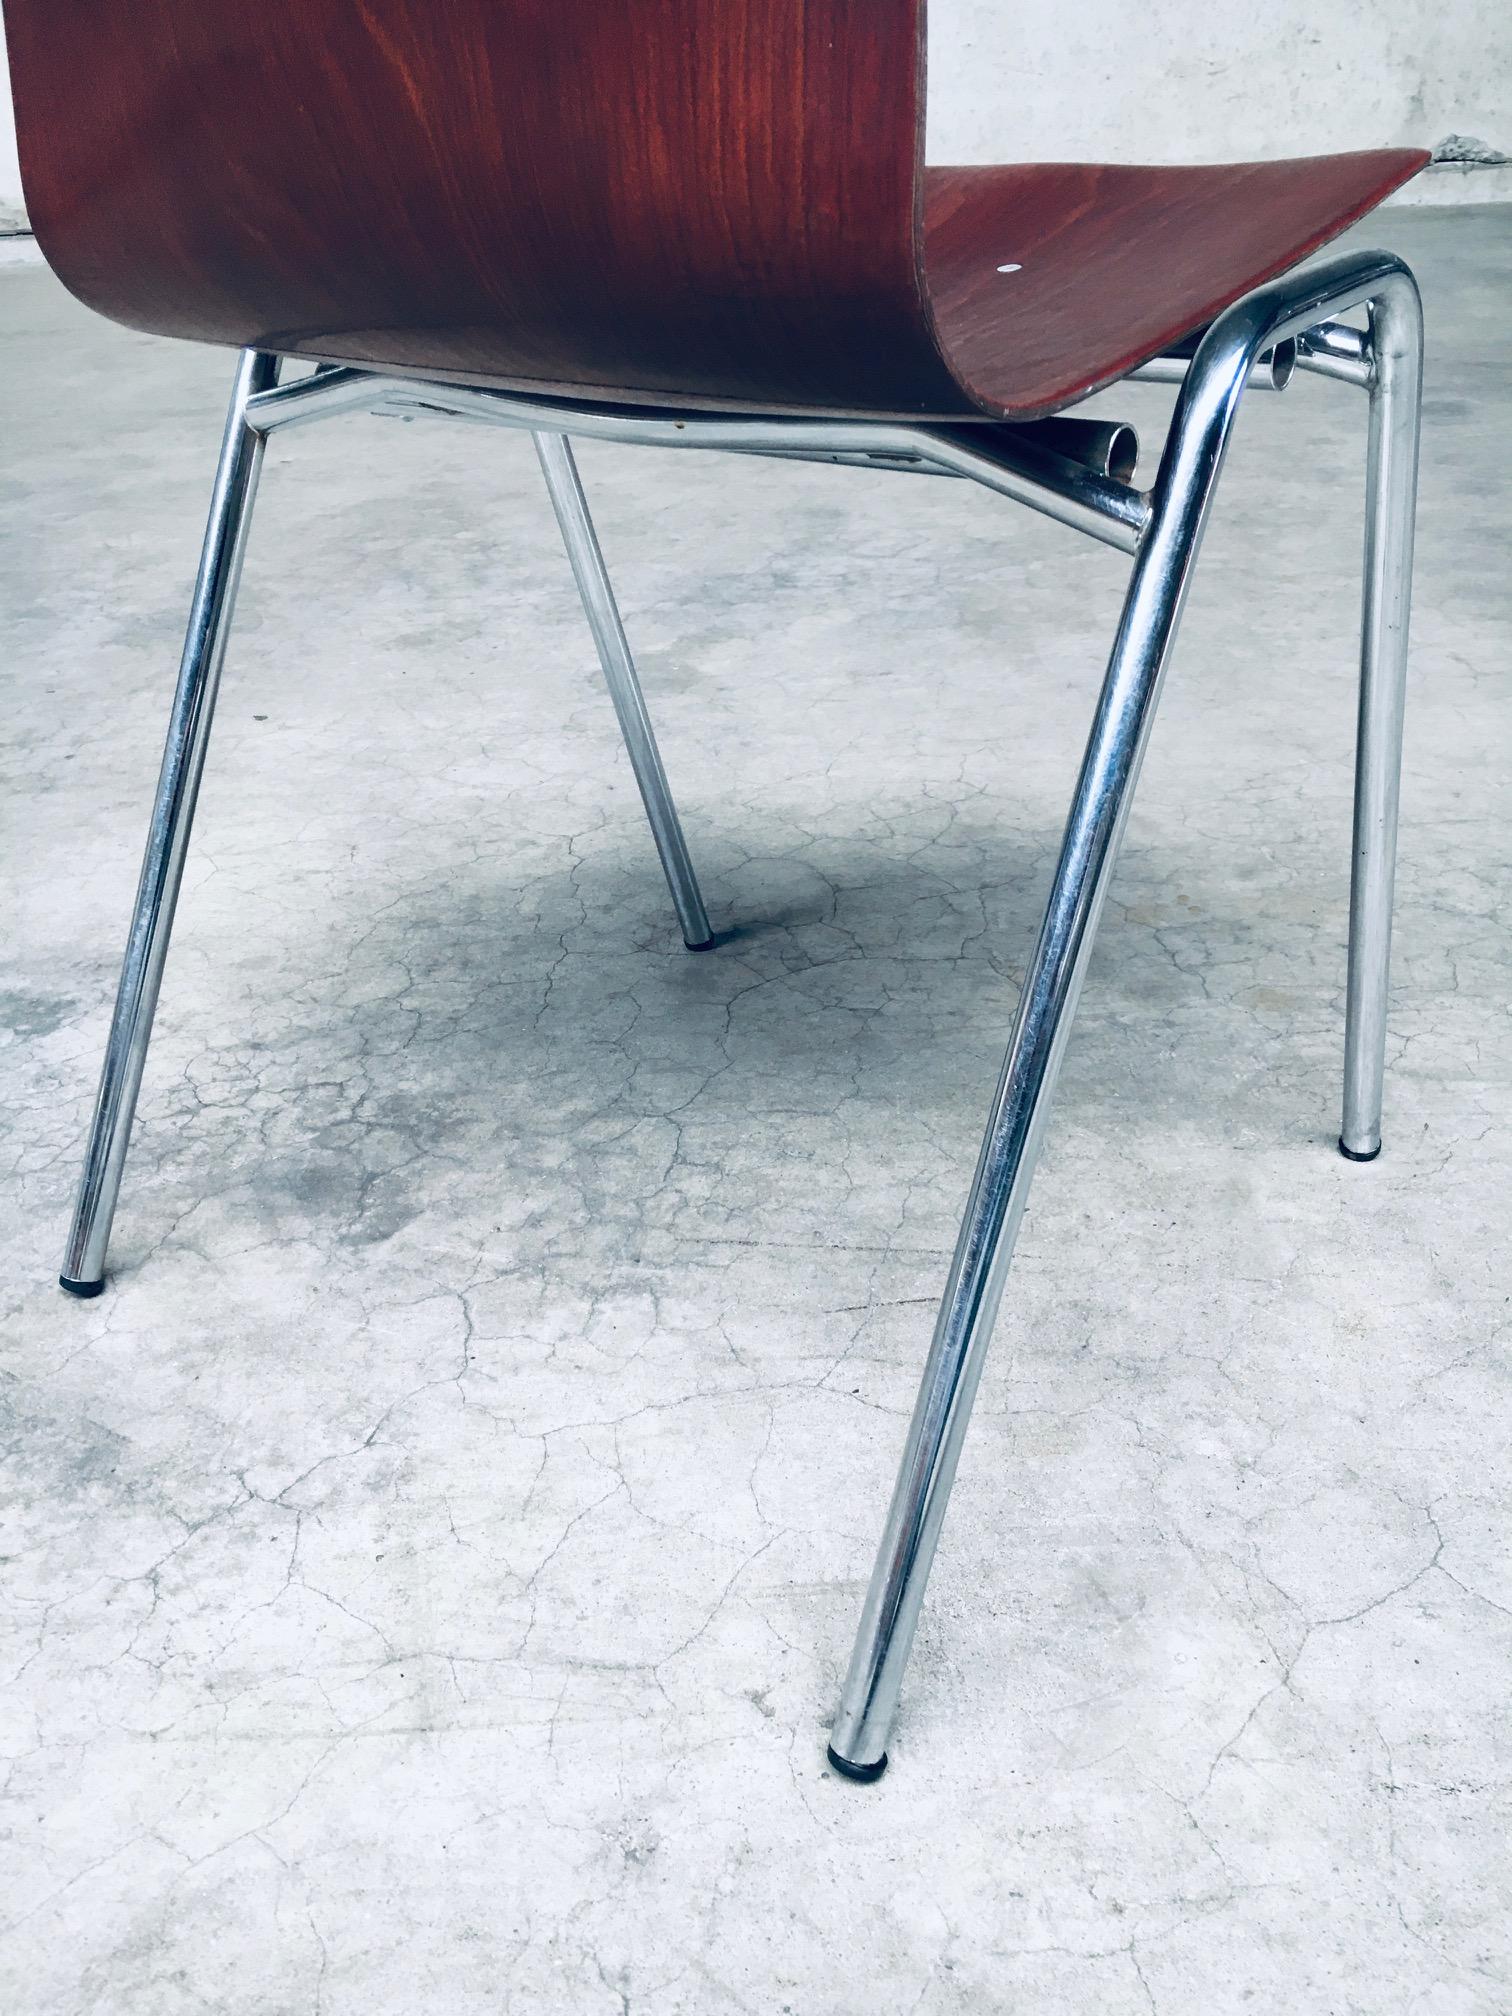 Midcentury Design Stacking Chairs by Elmar Flötotto for Pagholz, 1960's Germany For Sale 10